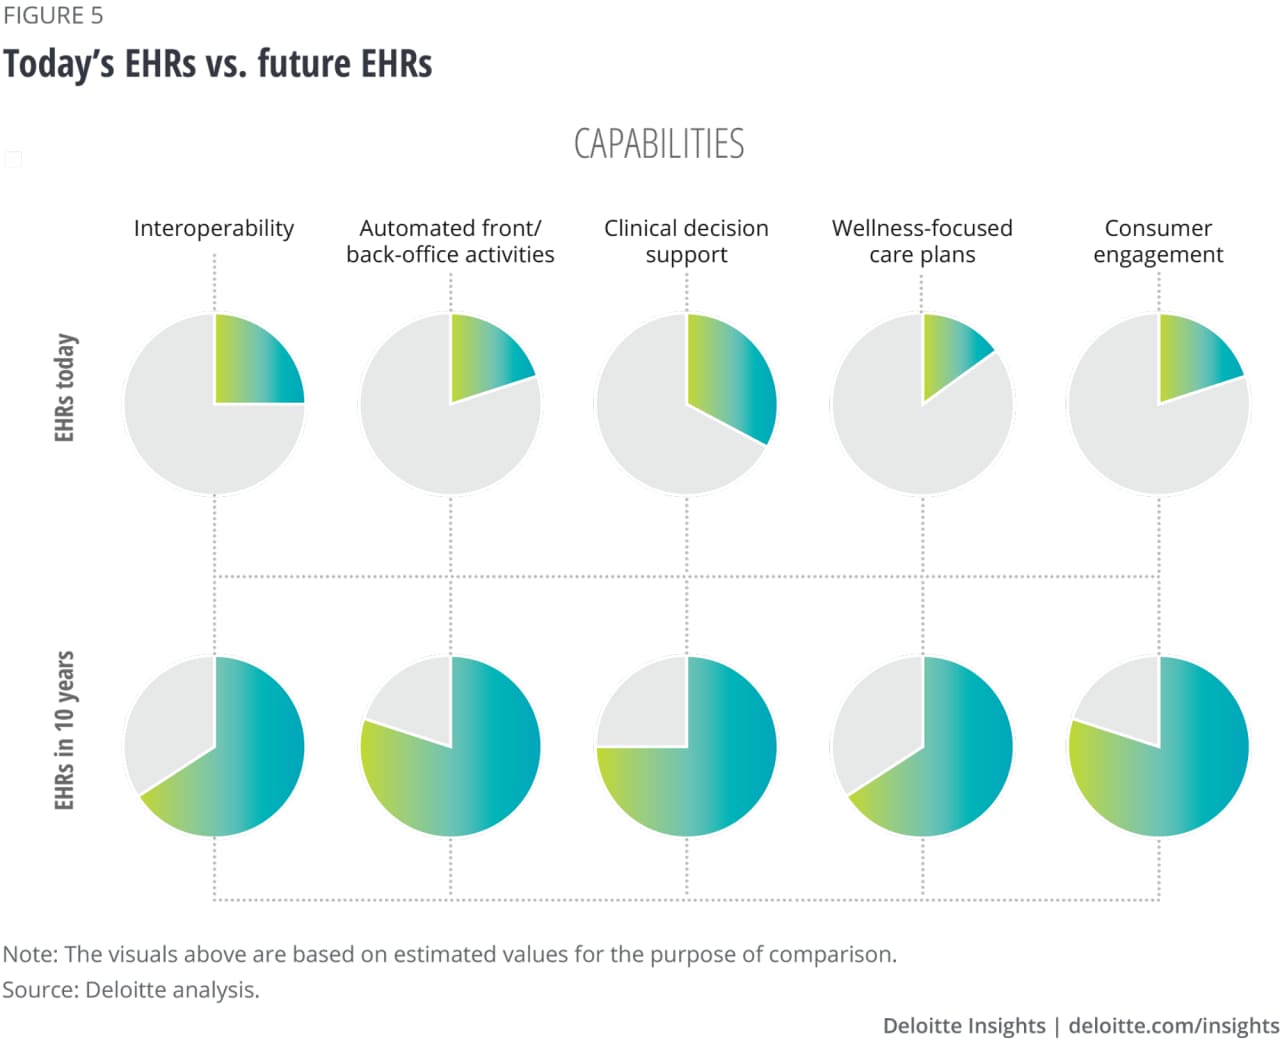 Figure 5: EHR capabilities today and in the future